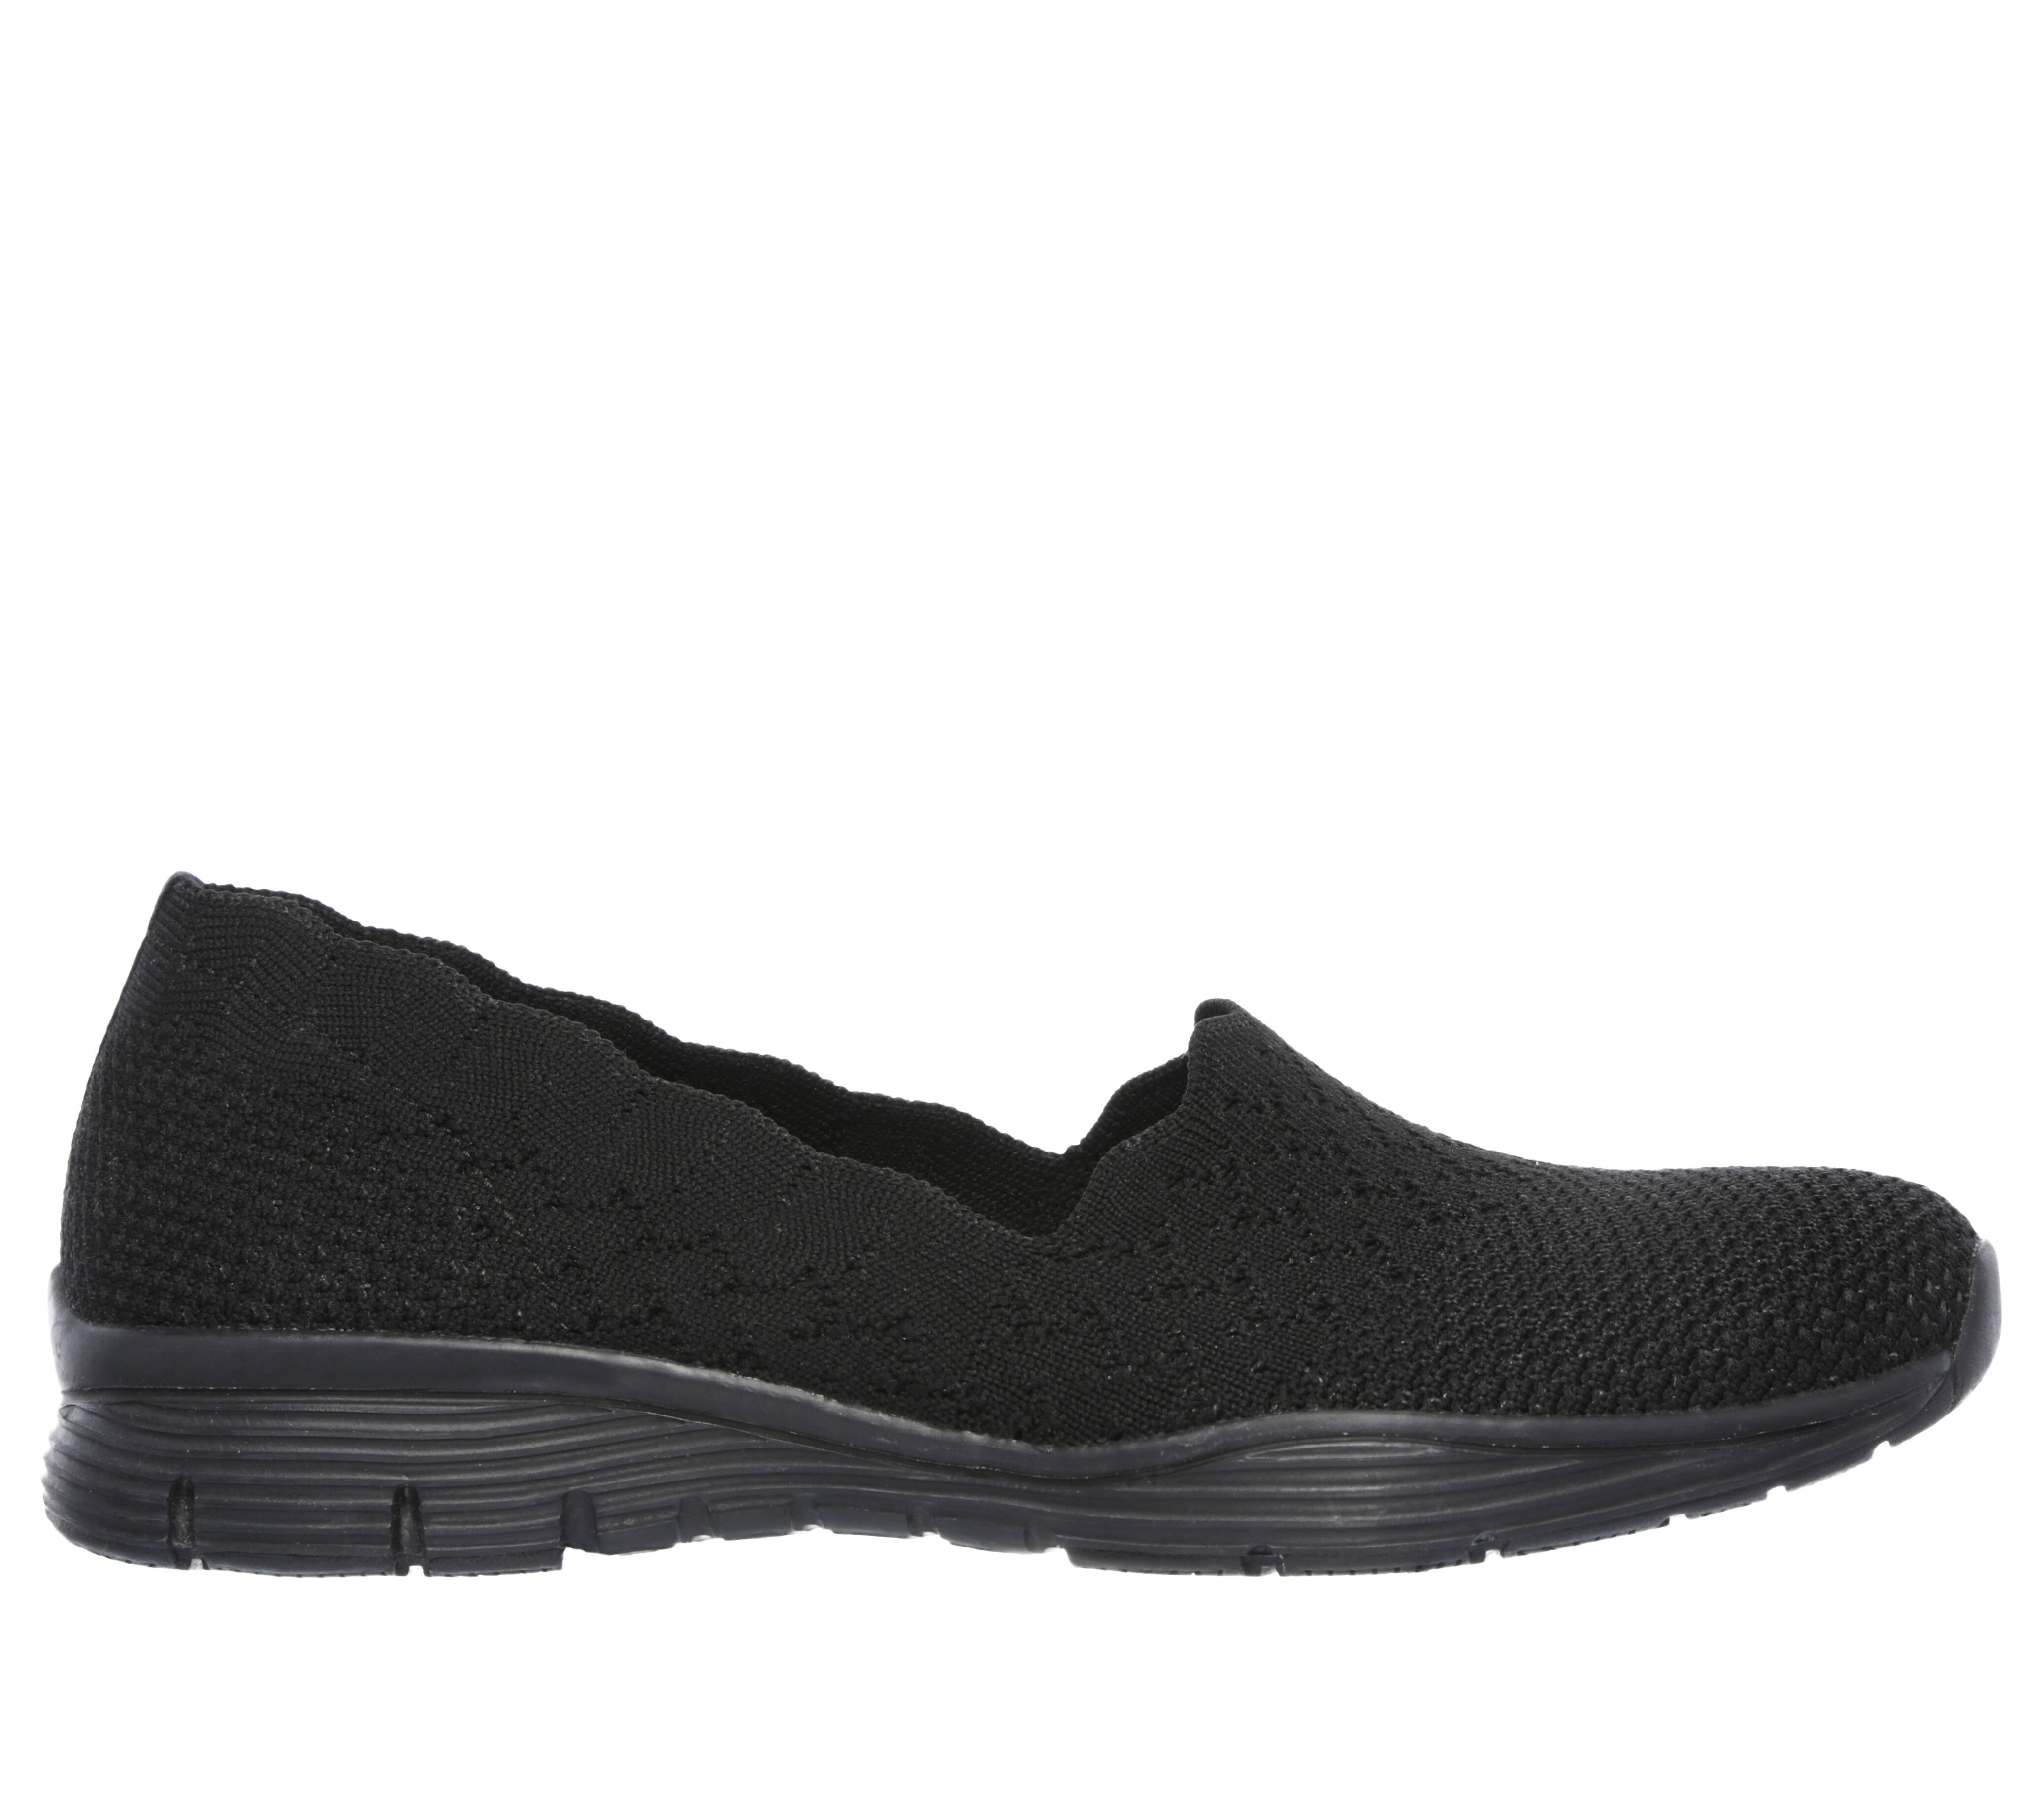 Shop the Seager - Stat | SKECHERS